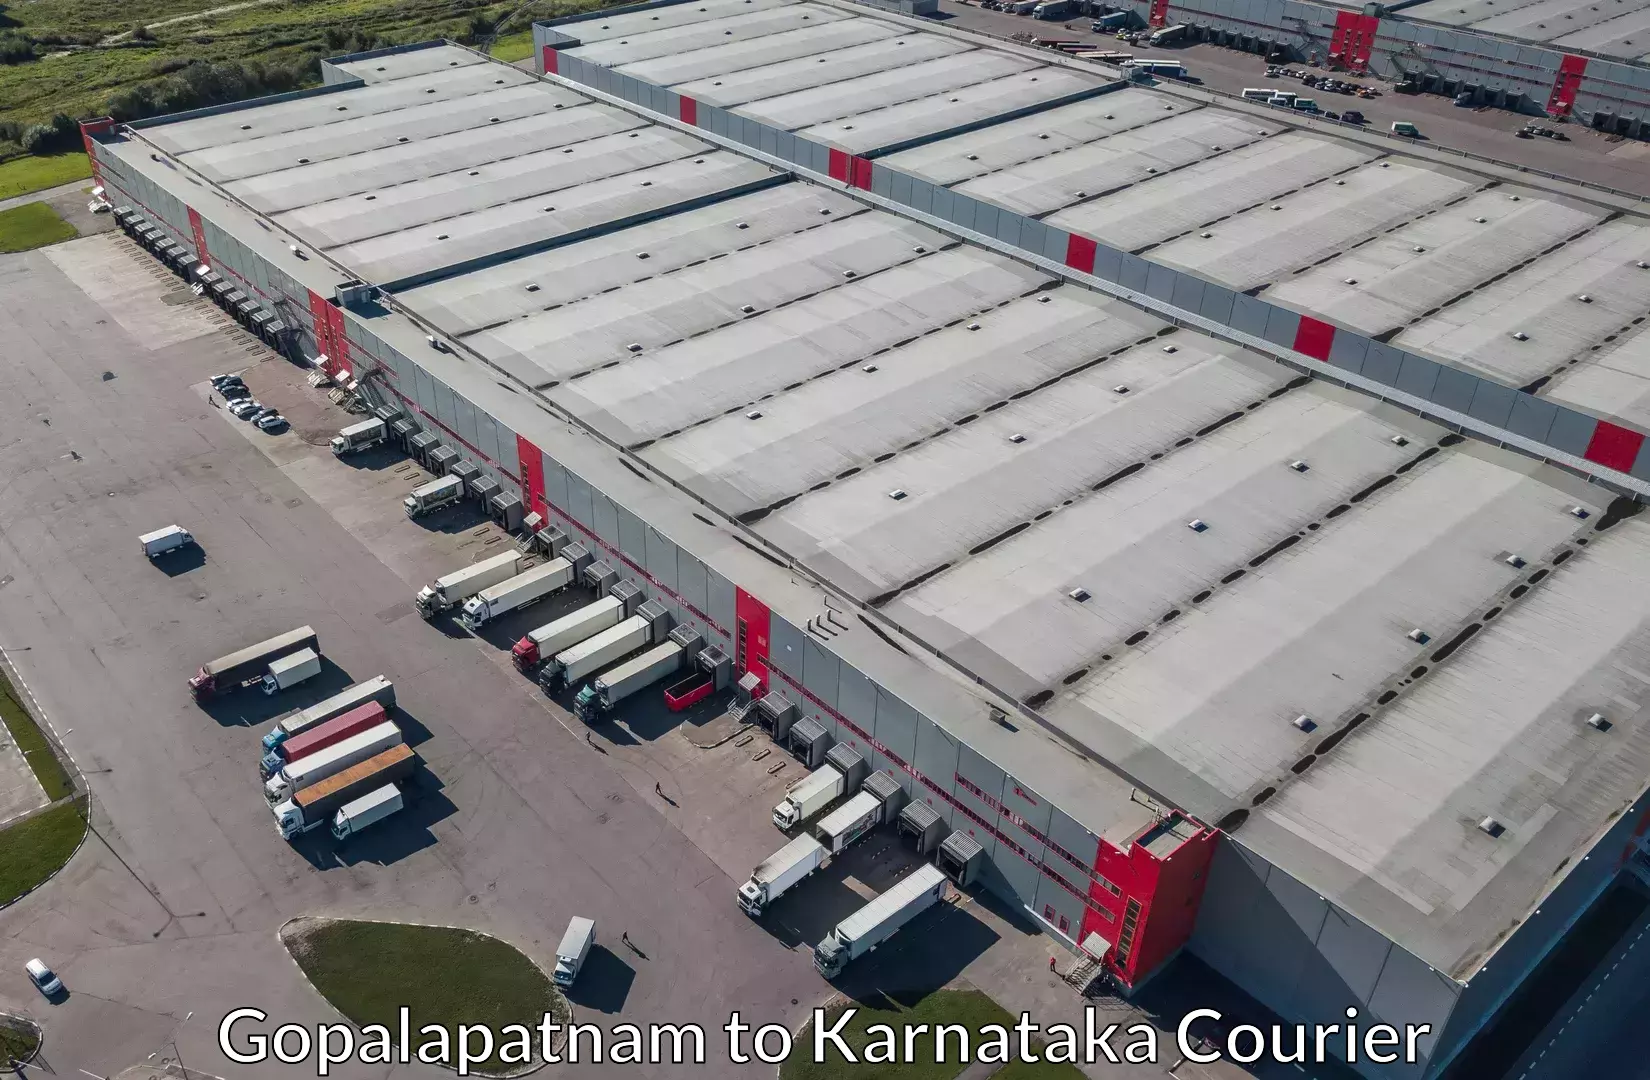 Furniture relocation experts Gopalapatnam to Hospet